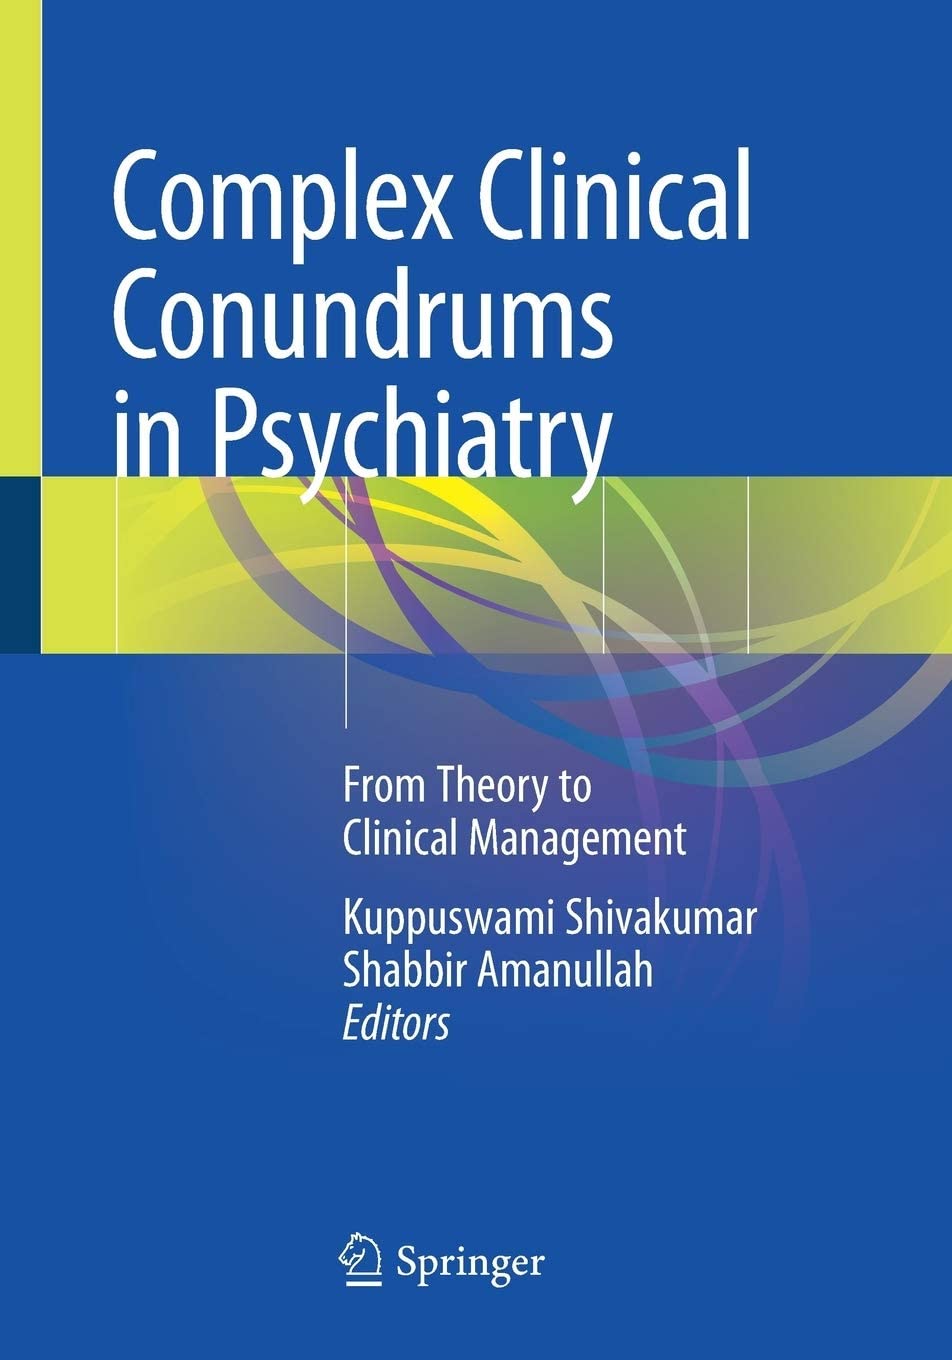 Complex Clinical Conundrums in Psychiatry